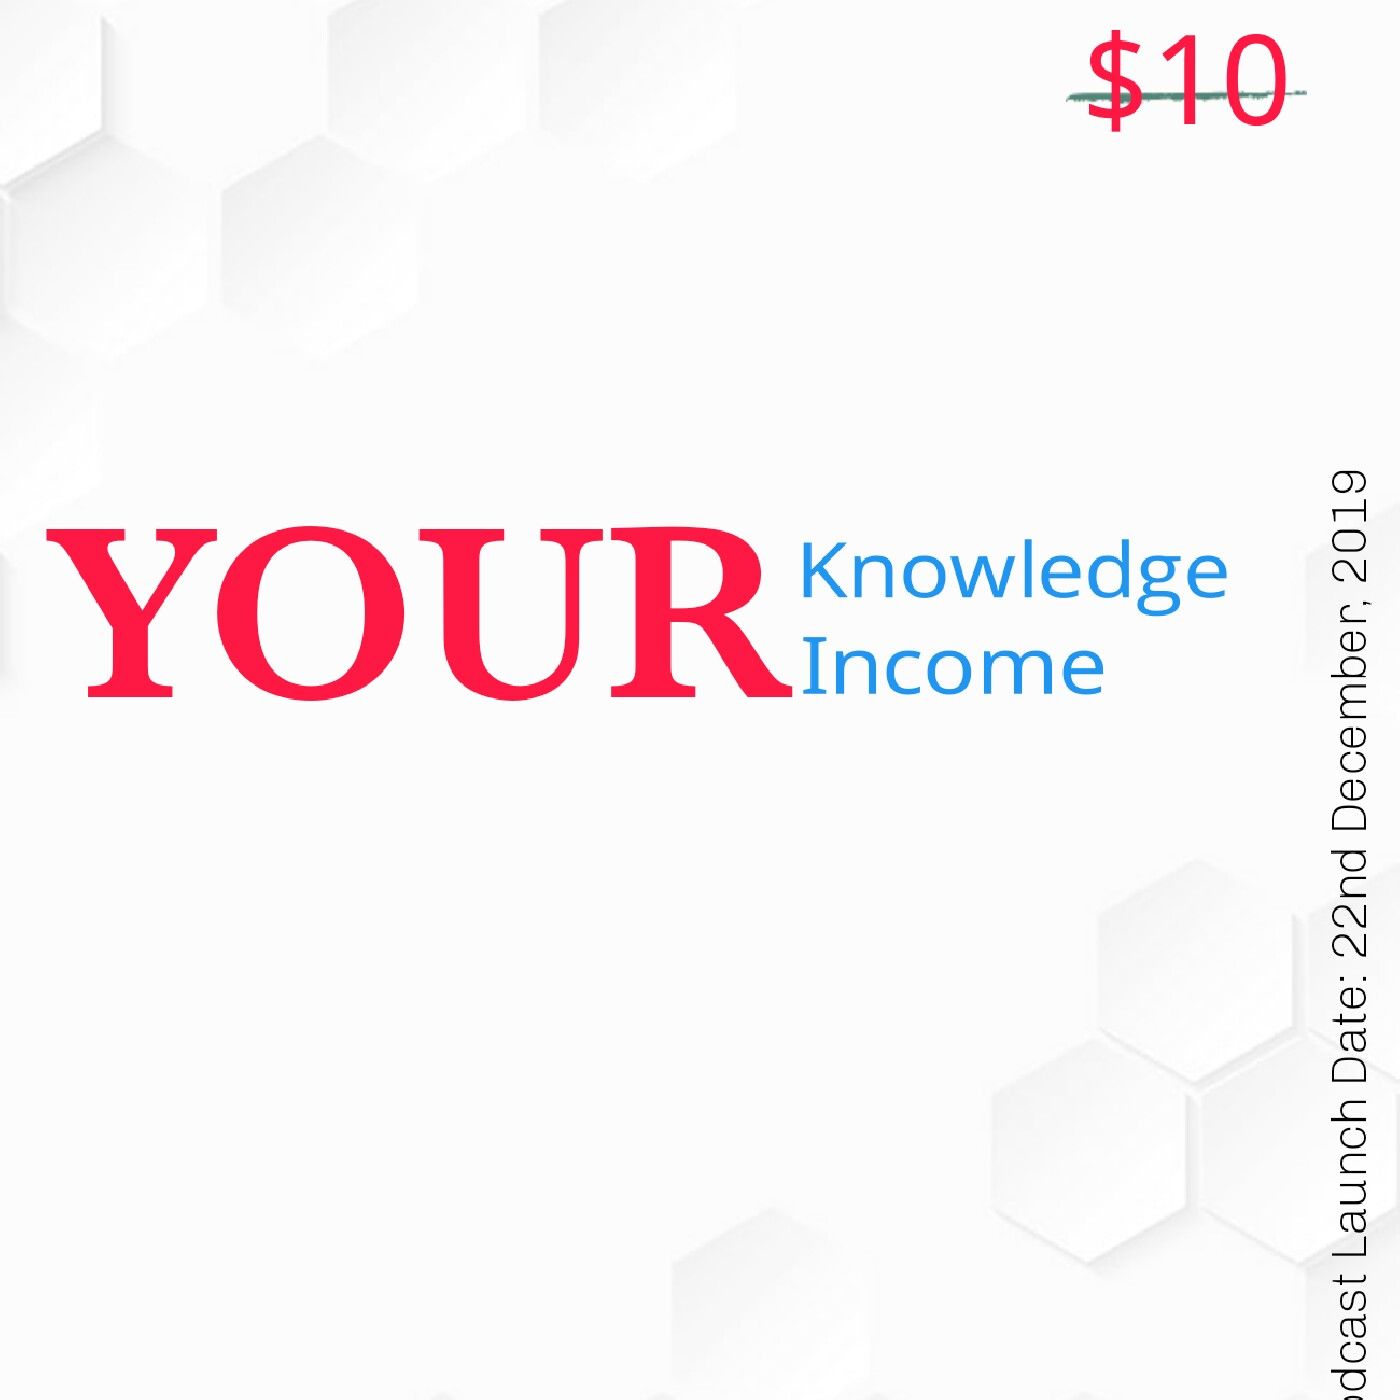 Episode 3 - Your Knowledge, Your Income